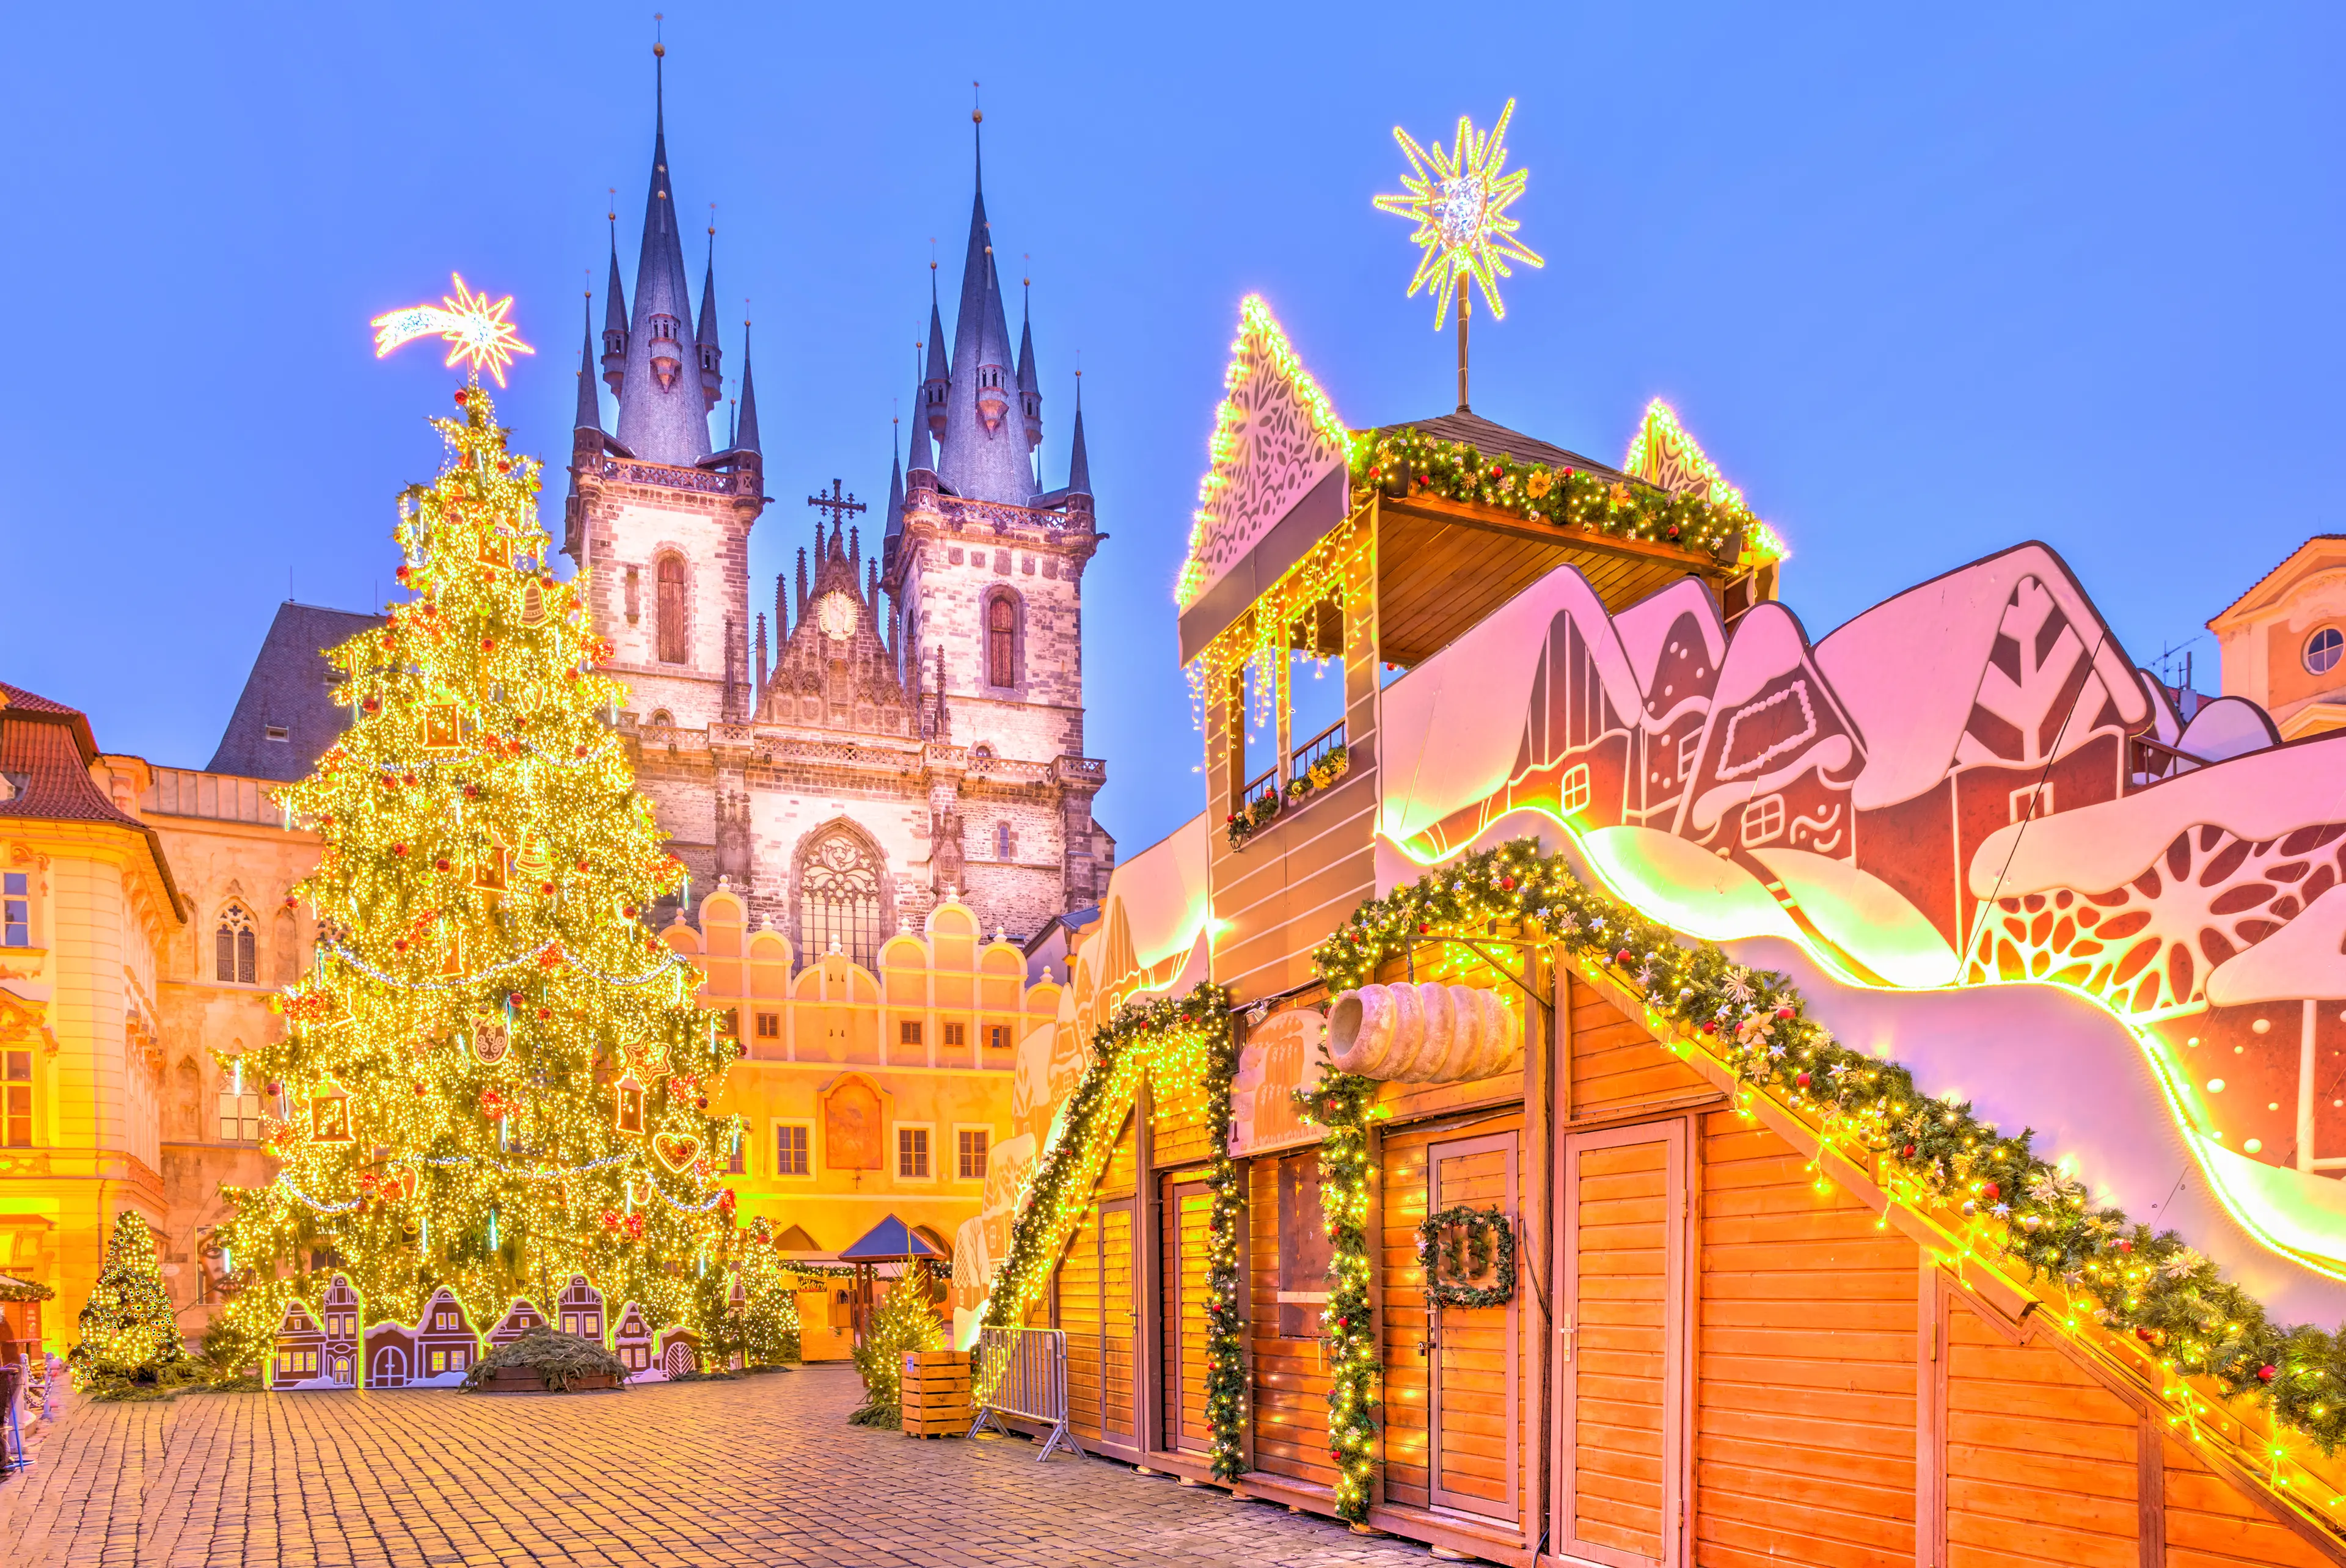 5-Day Romantic Christmas Holiday Itinerary for Prague, Czech Republic